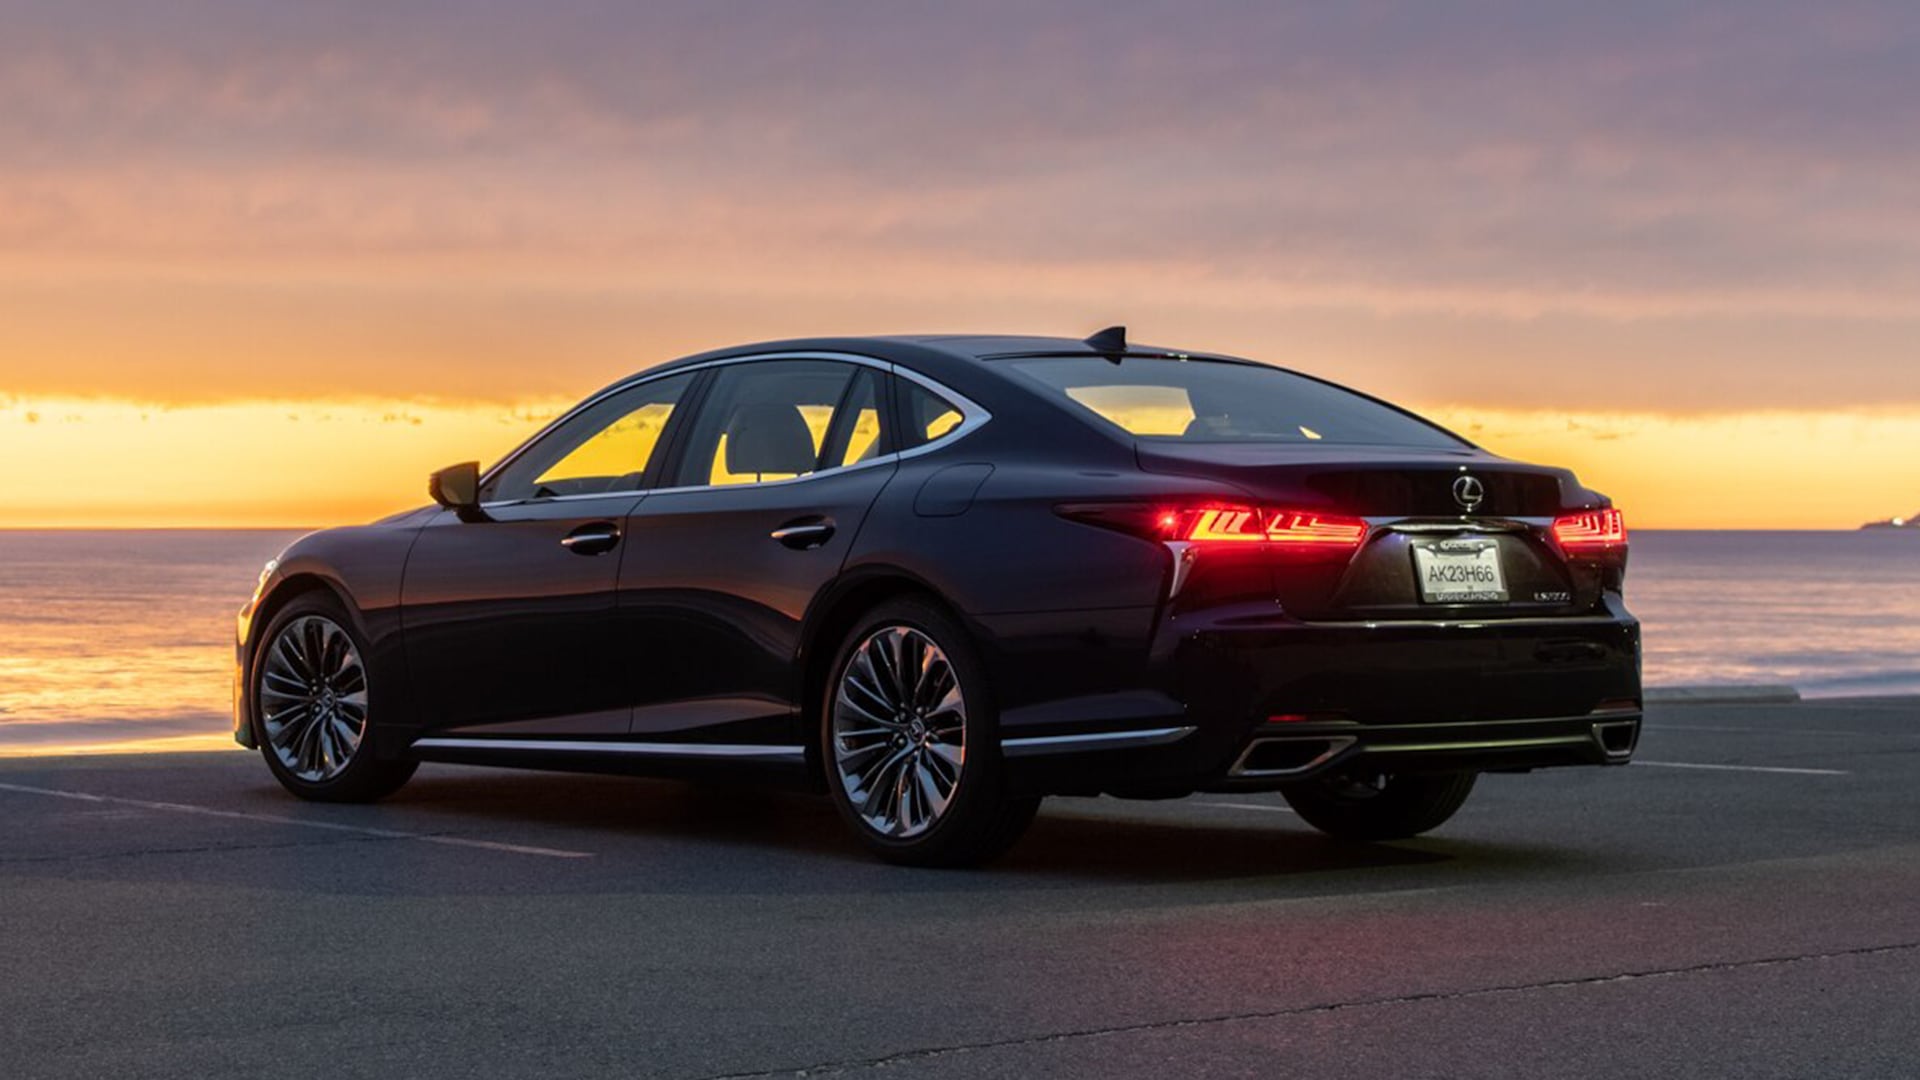 Our Long-Term 2020 Lexus LS500 Hauls Human Cargo More Than Capably